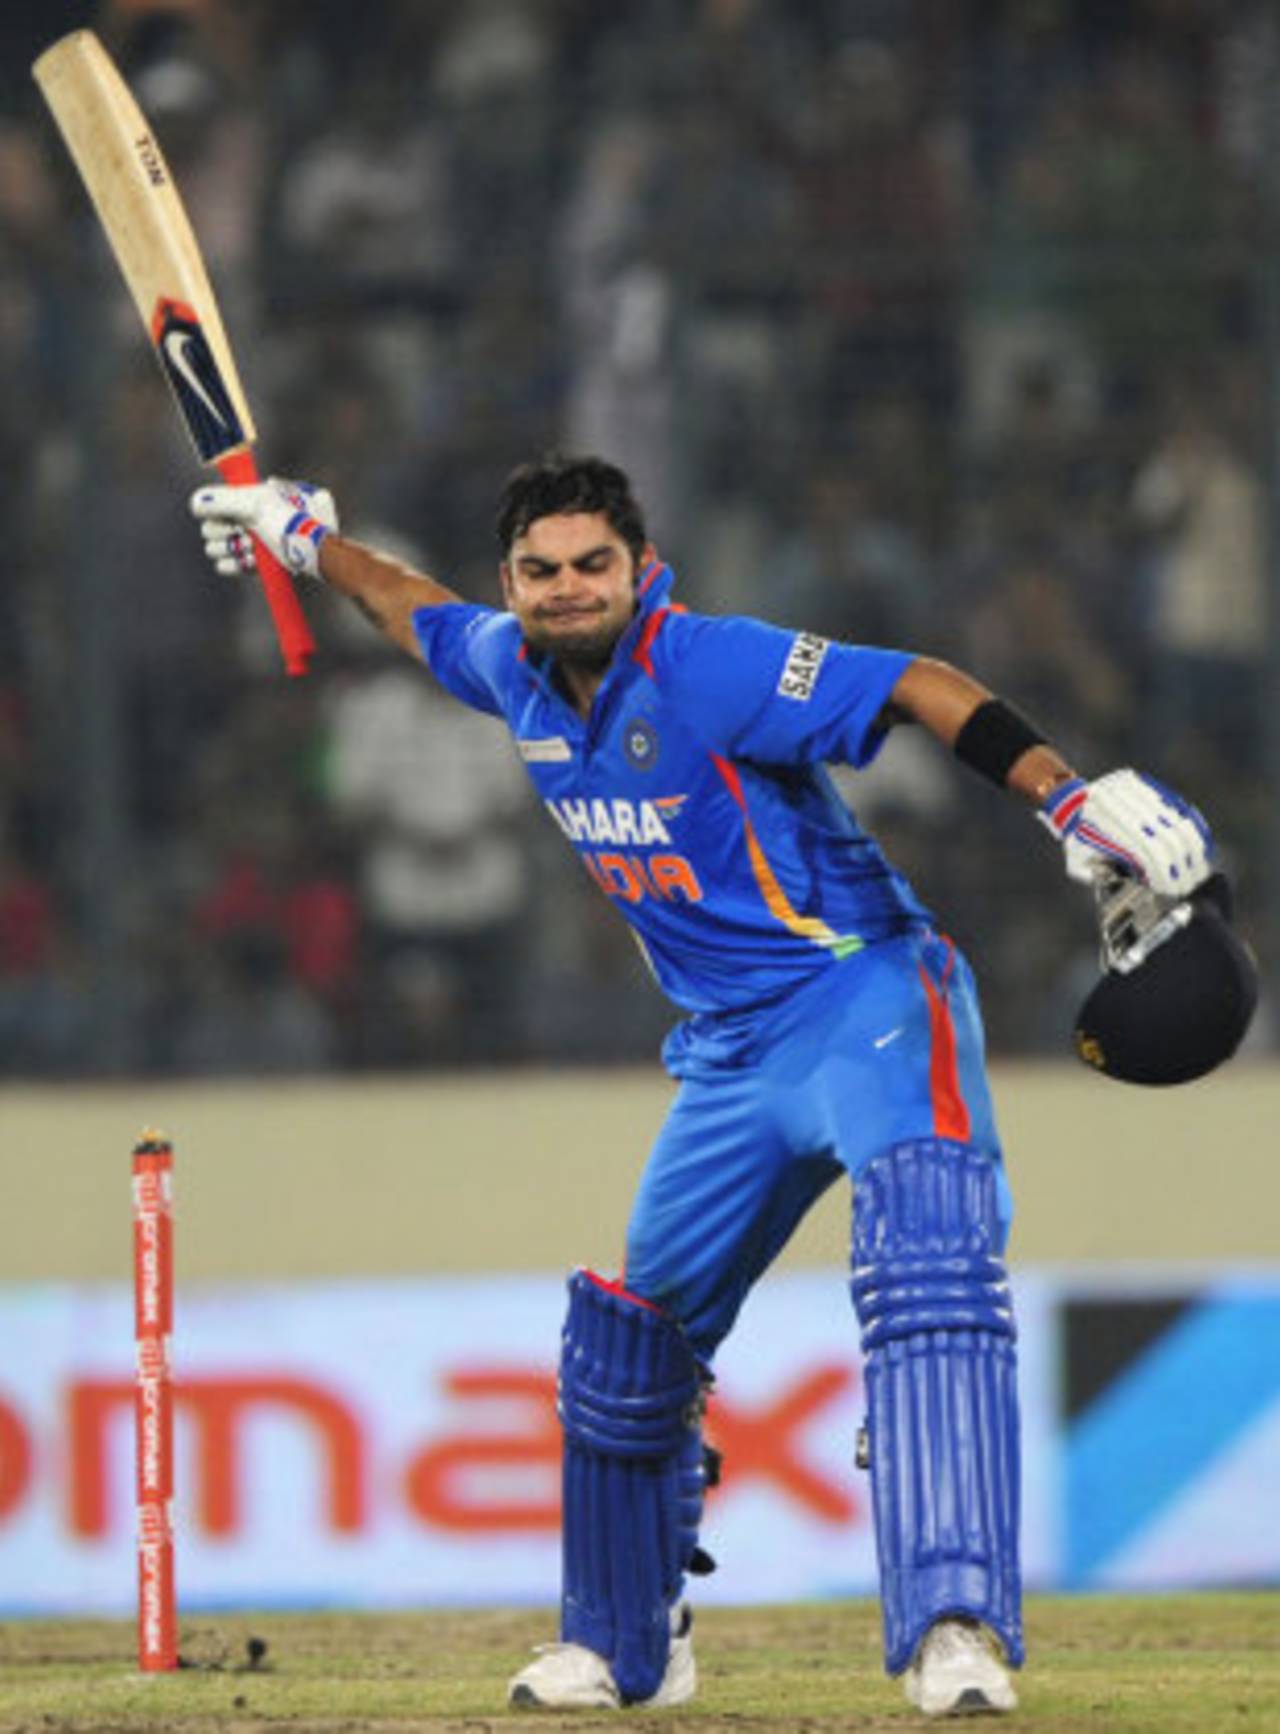 Virat Kohli is pumped up after reaching his third hundred in four ODIs, India v Pakistan, Asia Cup, Mirpur, March 18, 2012